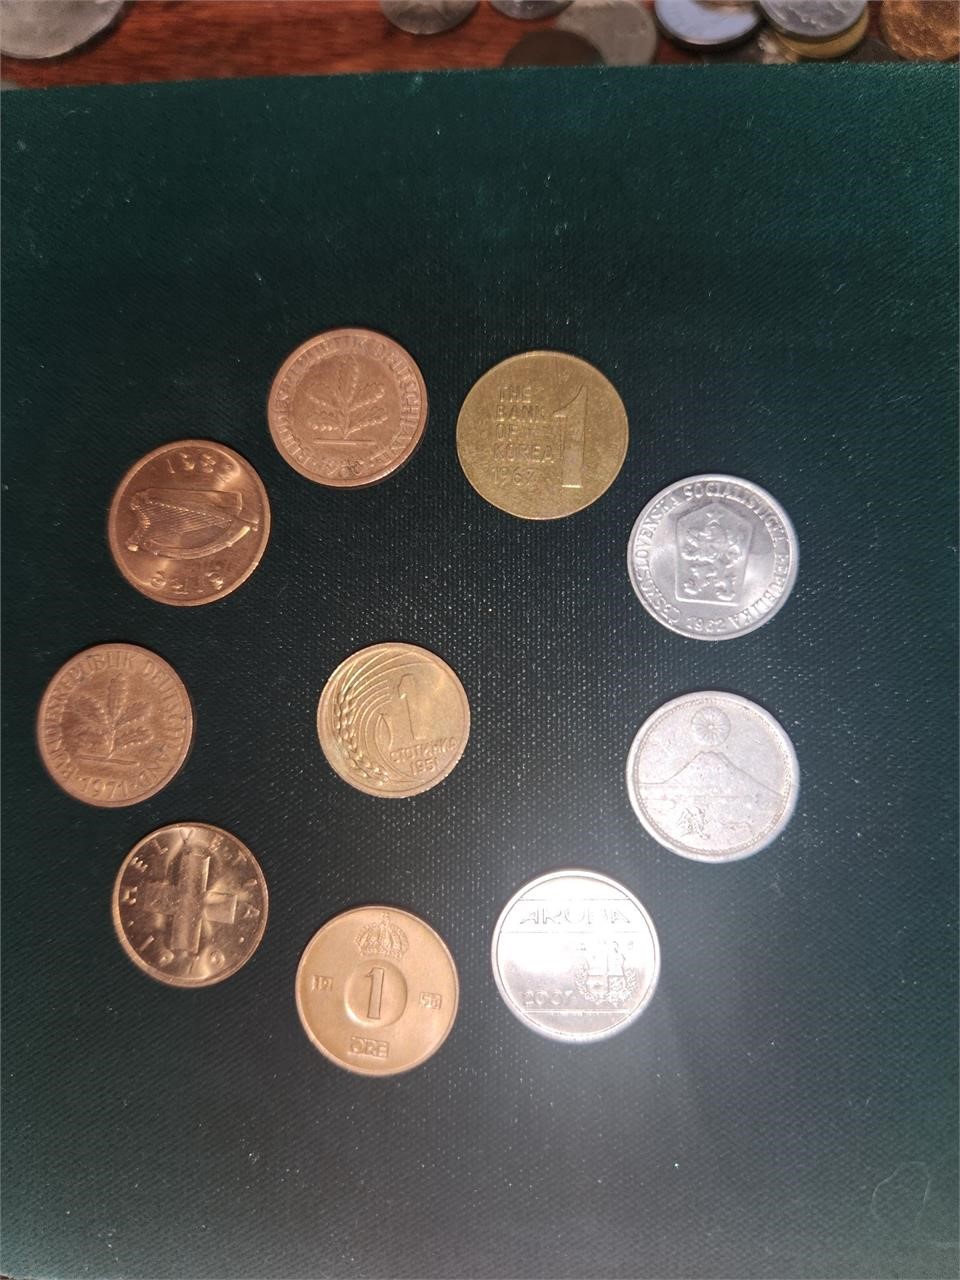 Foreign currency, Silver, old US currency, wheat pennies